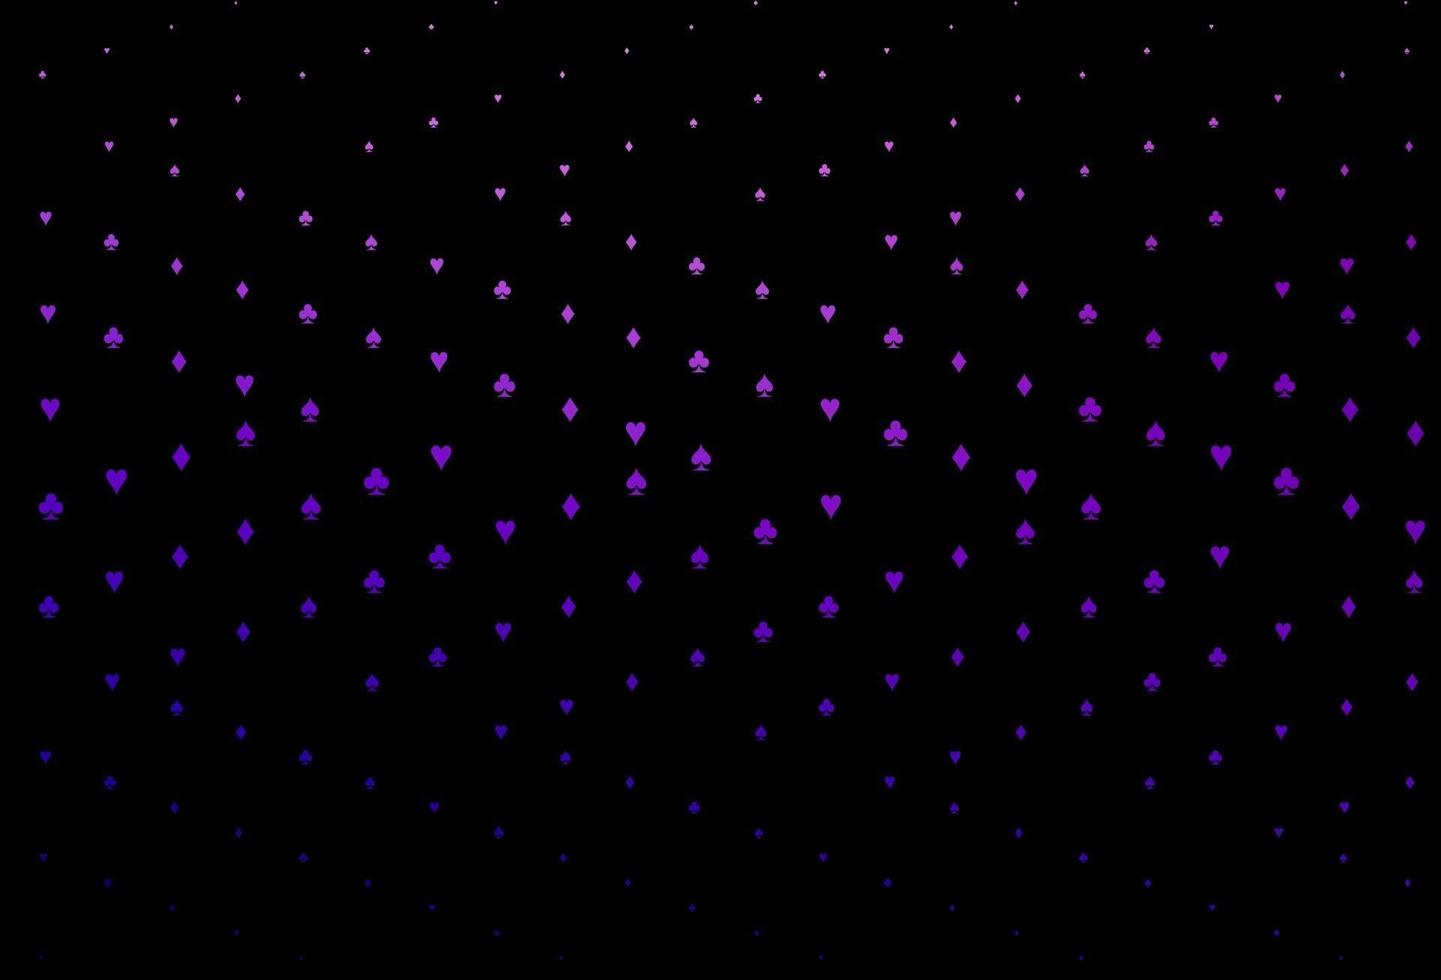 Dark Purple vector background with cards signs.